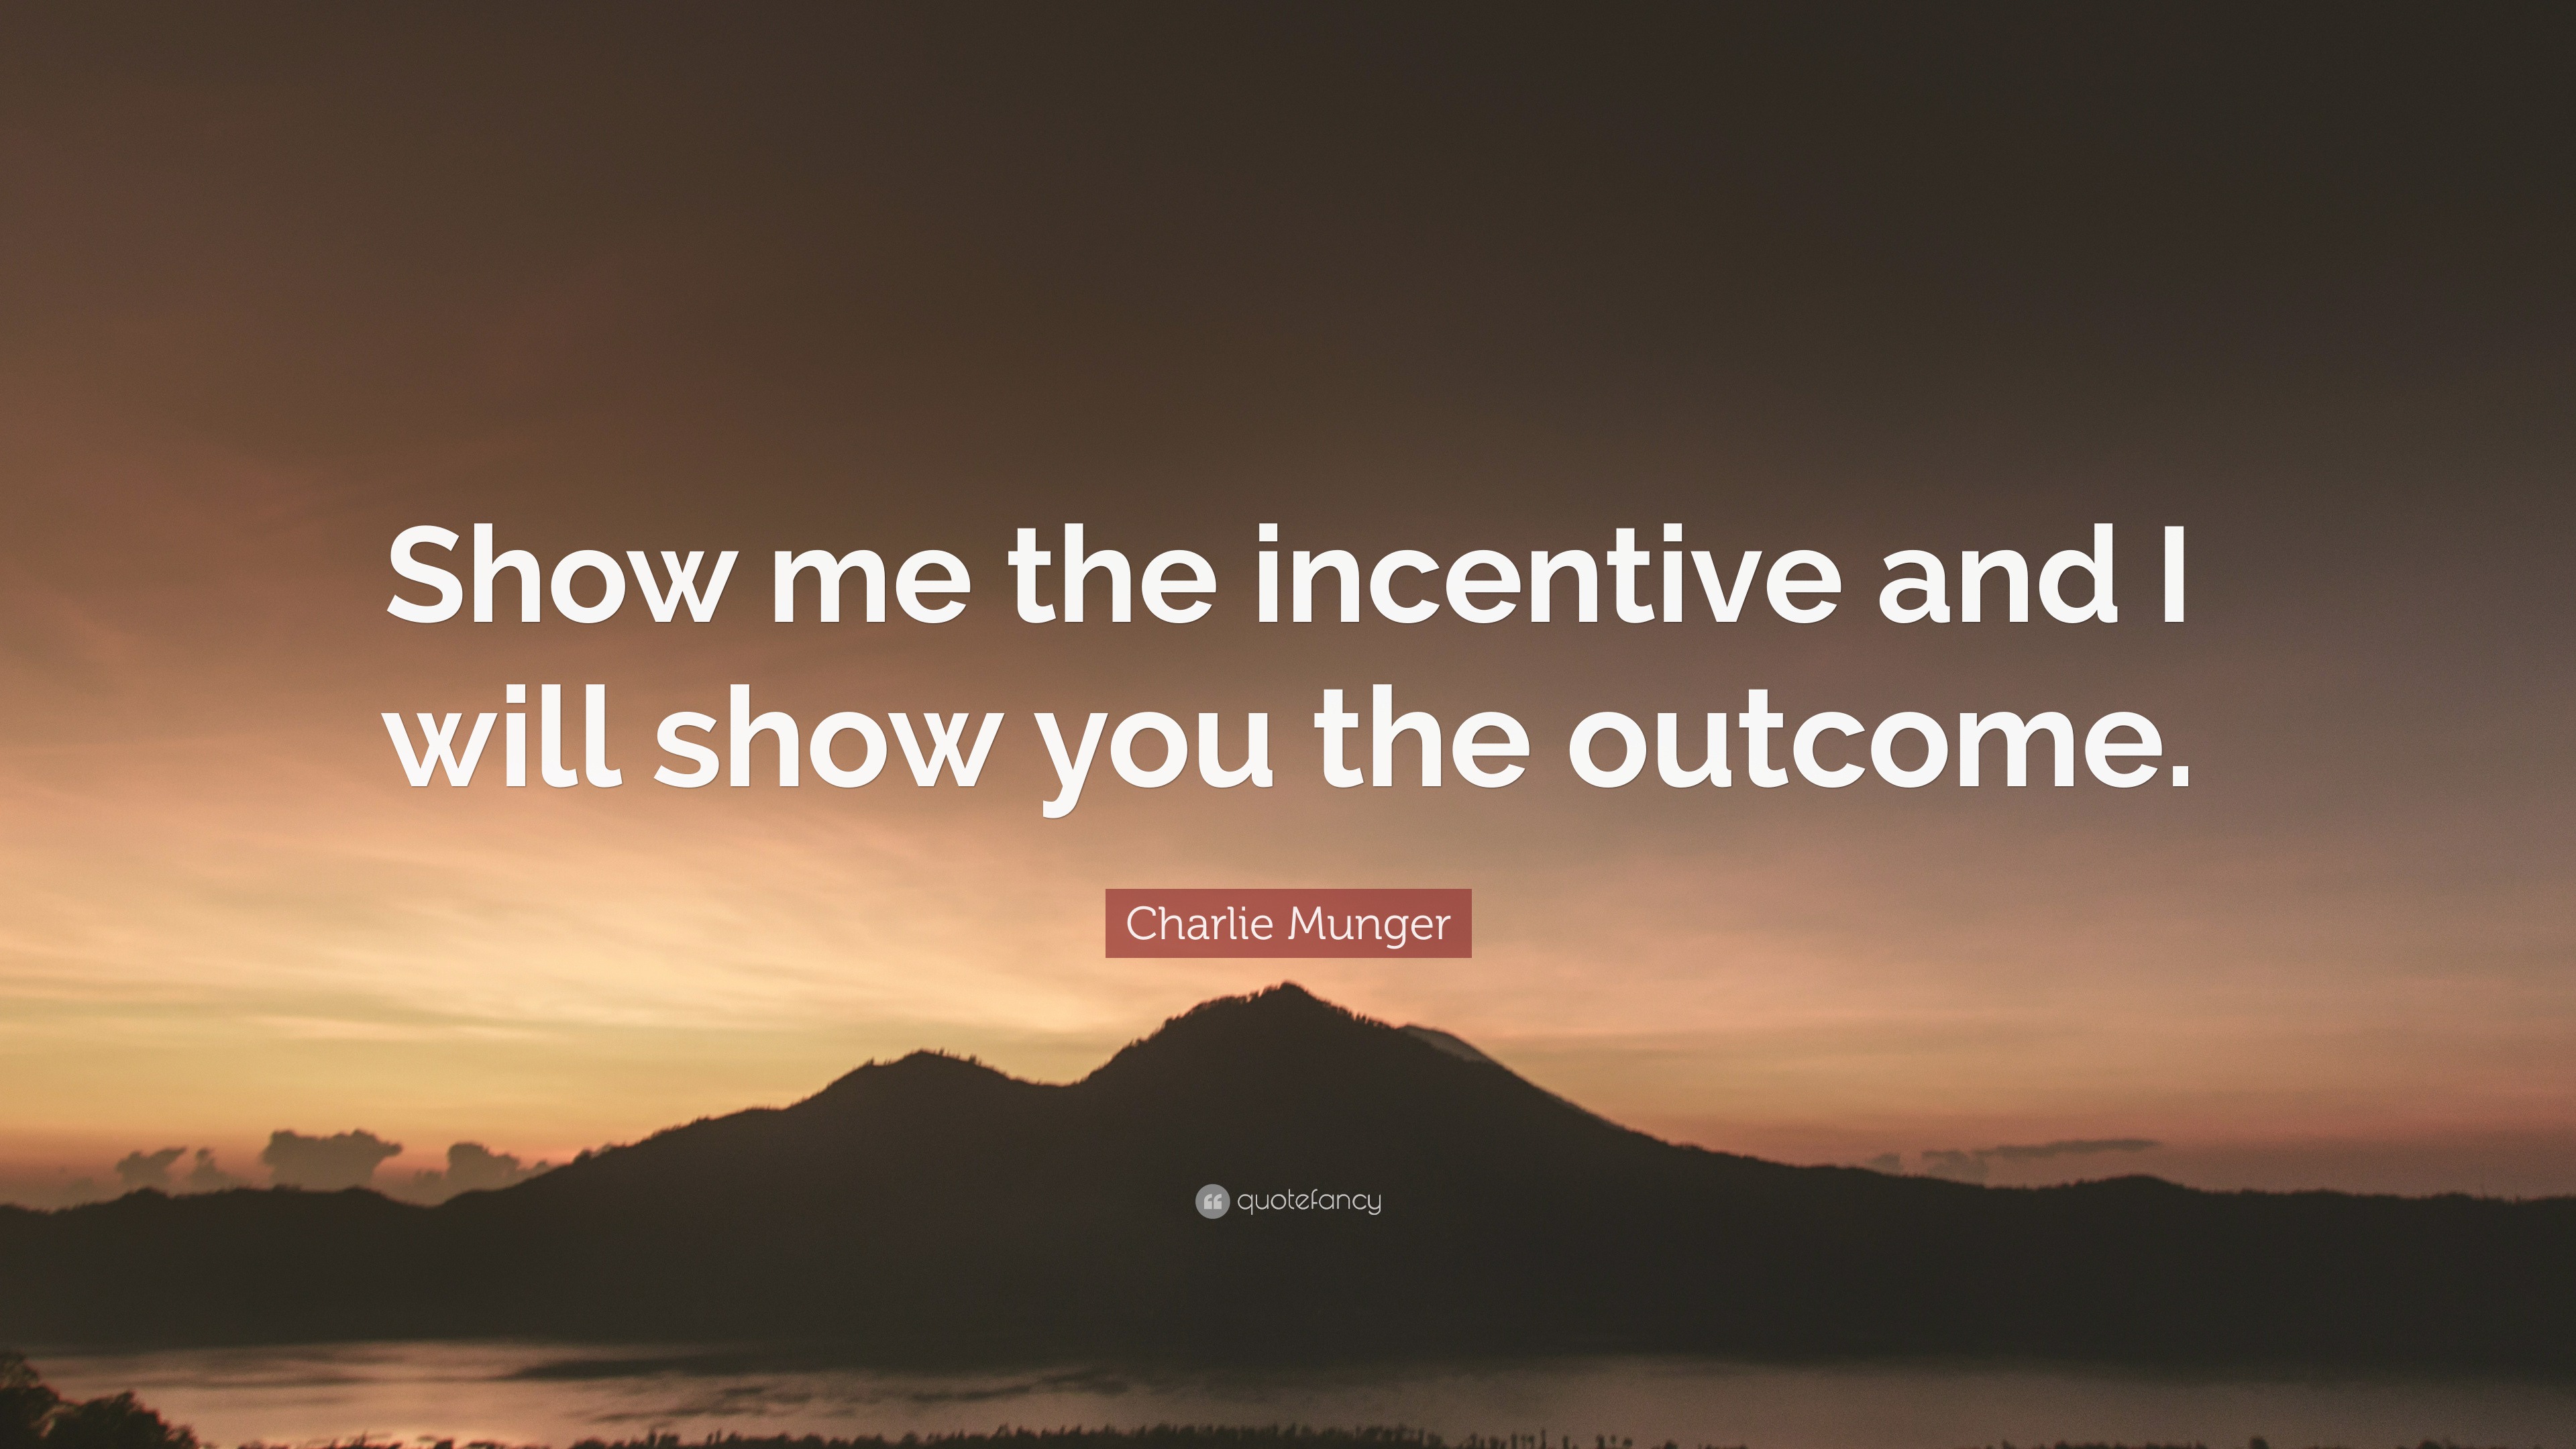 Show me the incentive and I will show you the outcome. — Charlie Munger